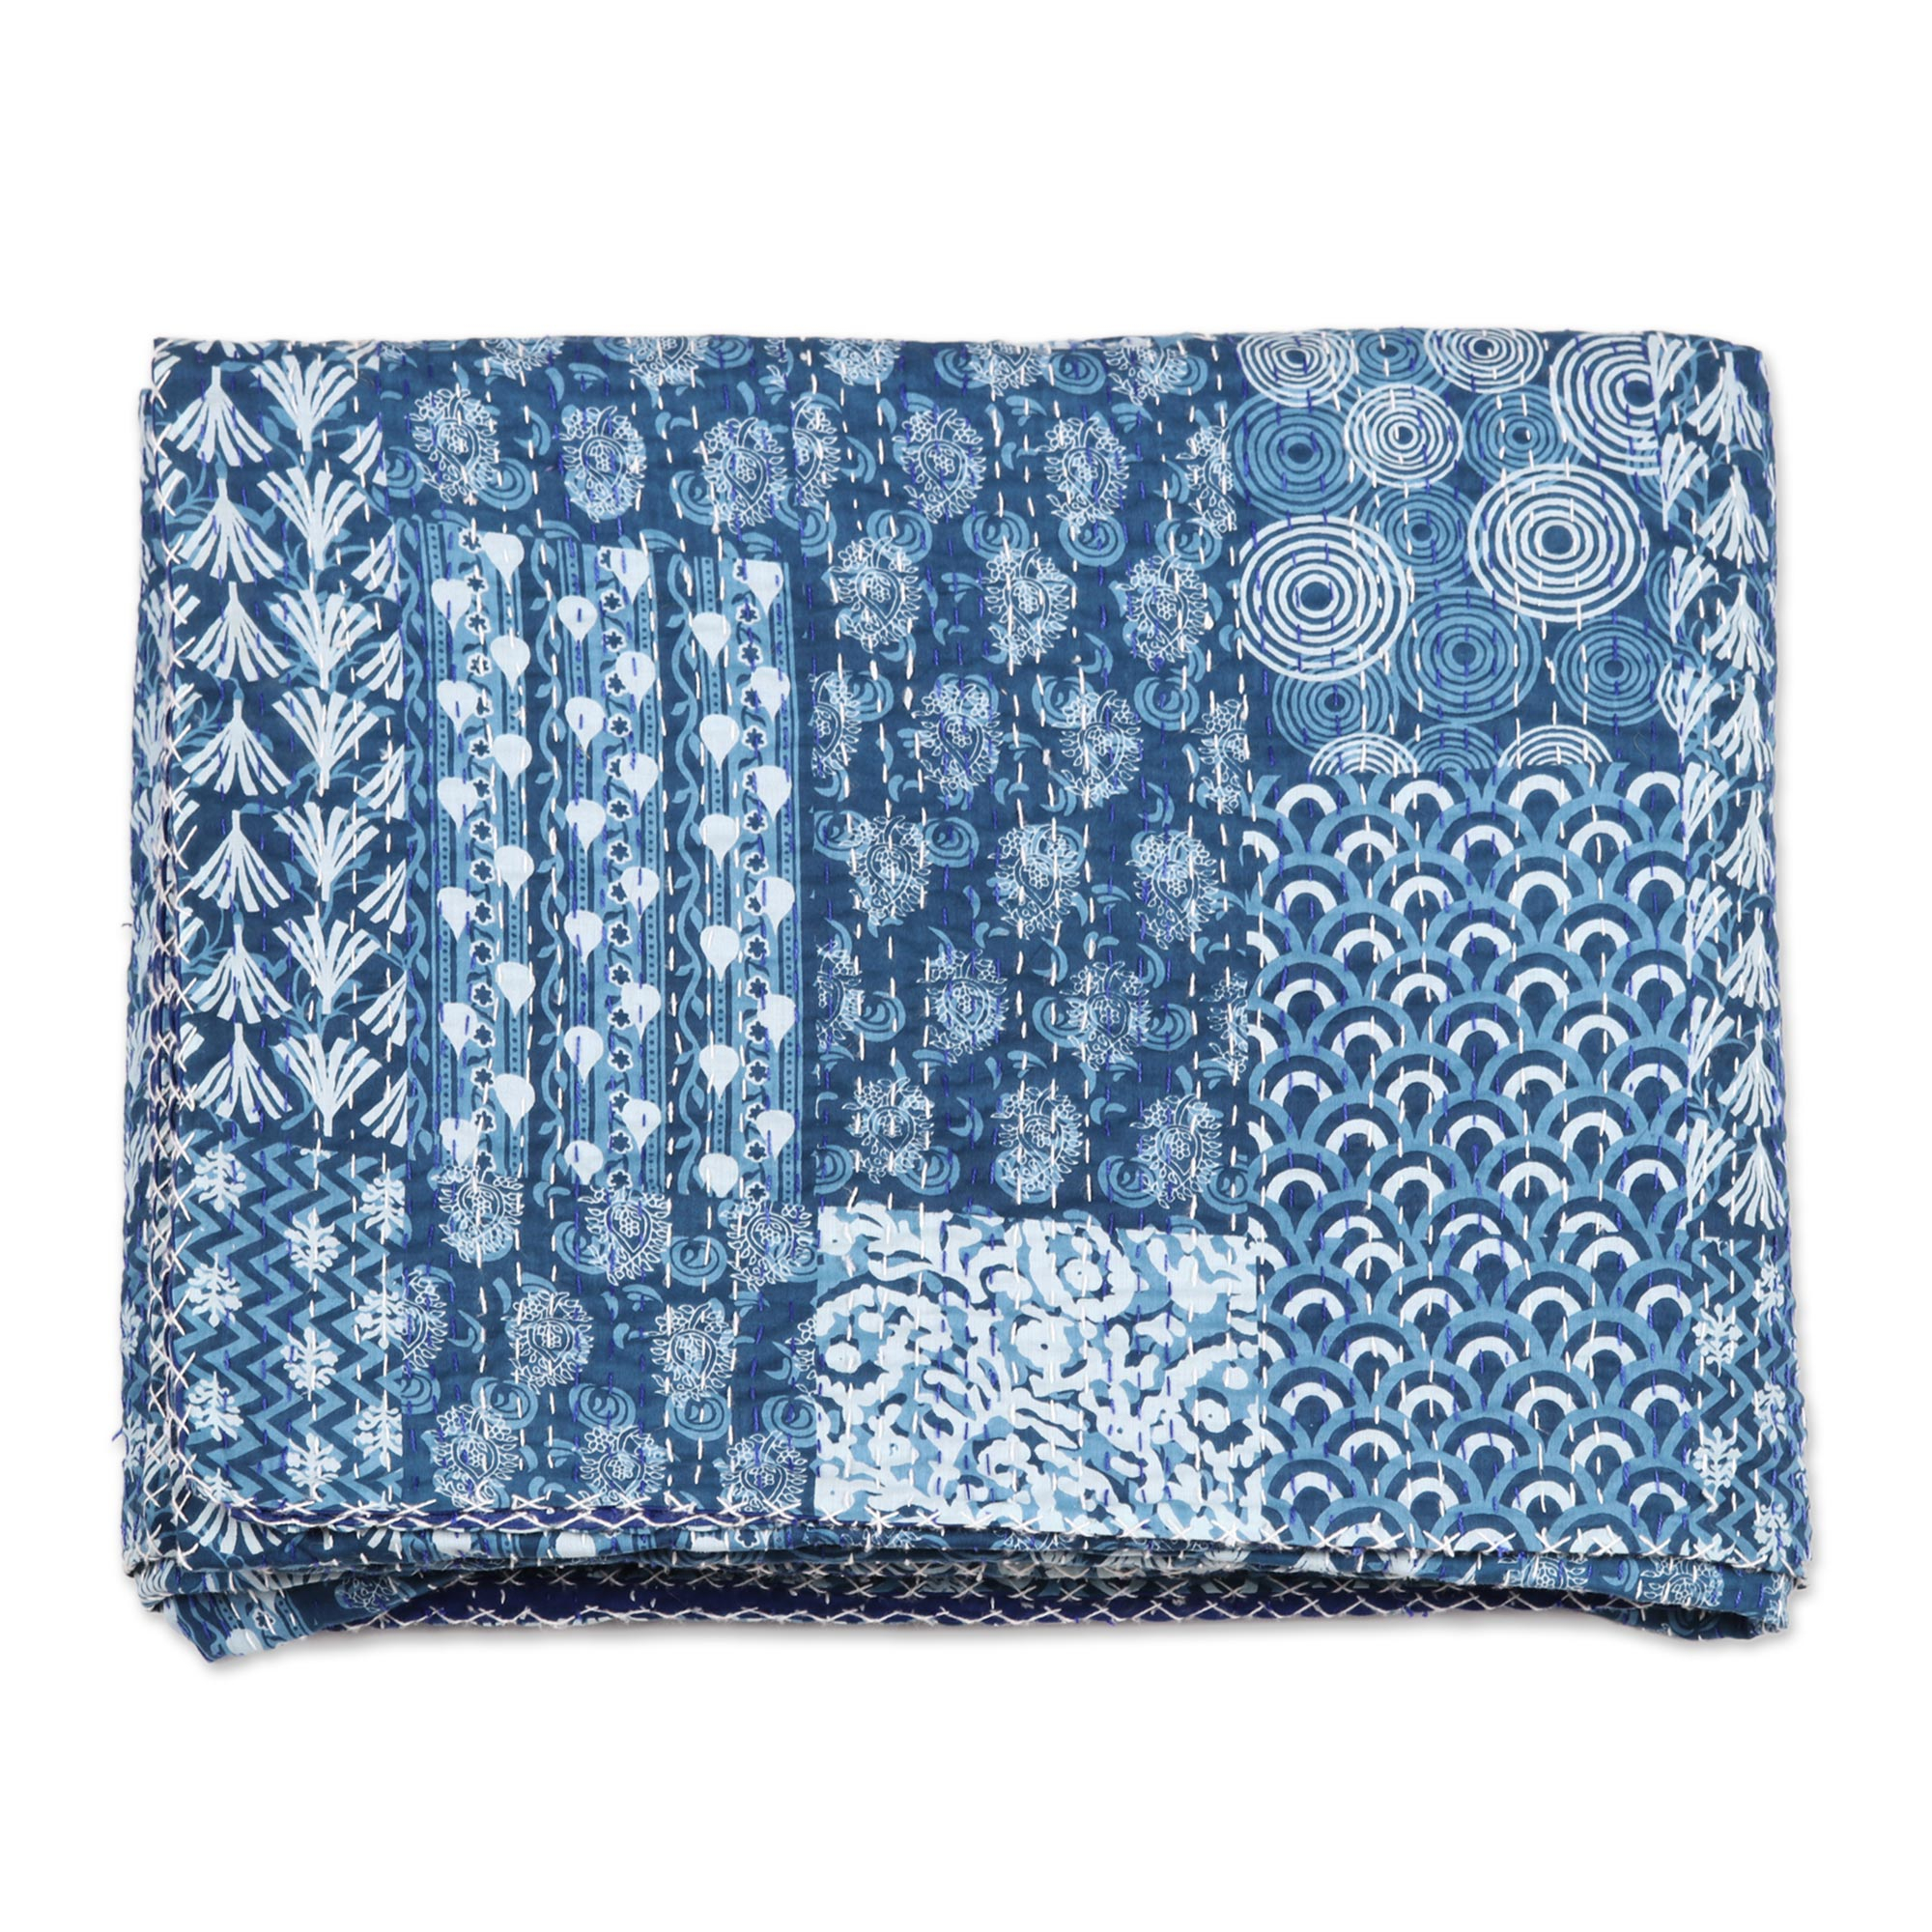 UNICEF Market | Blue and White Cotton Kantha Bedspread and Shams (3 ...